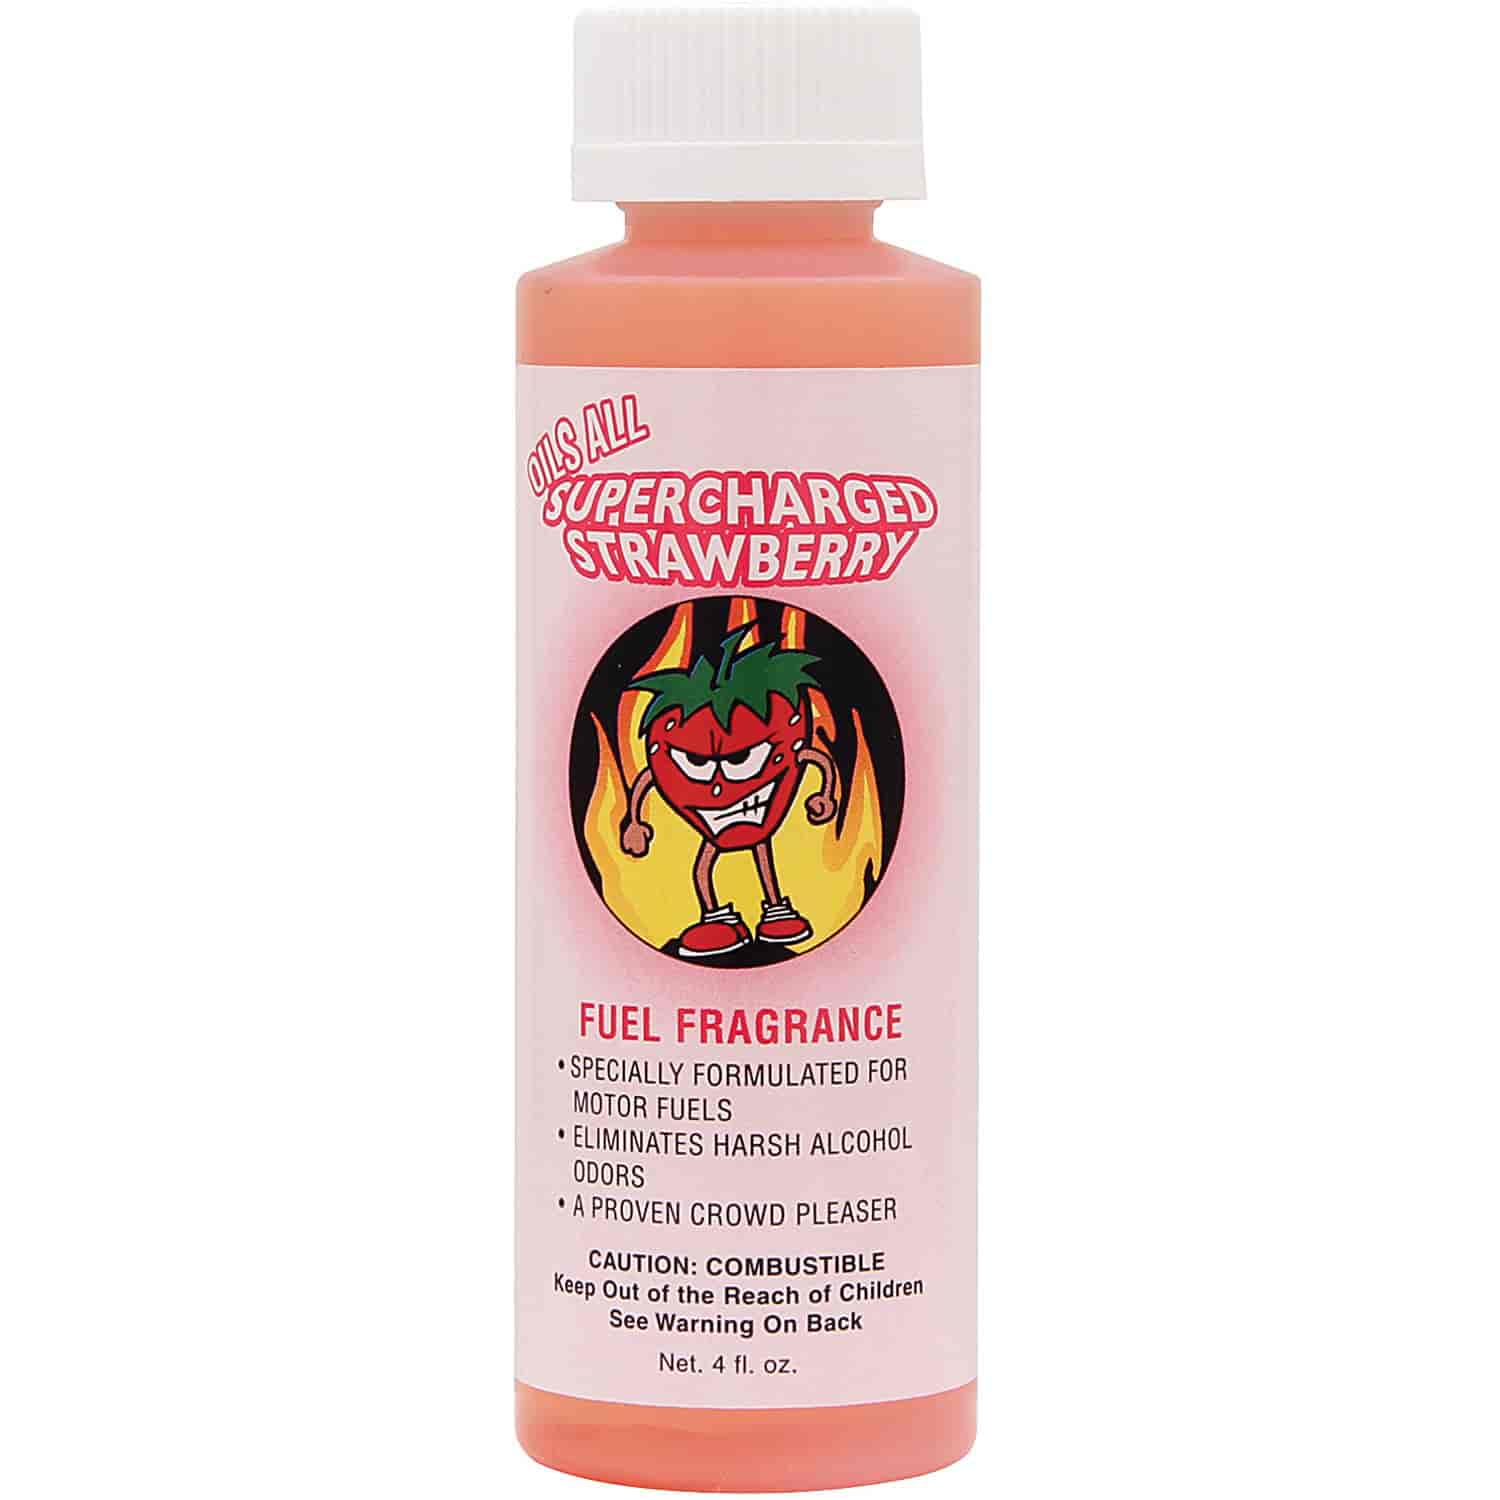 Supercharged Strawberry Fuel Fragrance Resealable 4 oz. Bottle